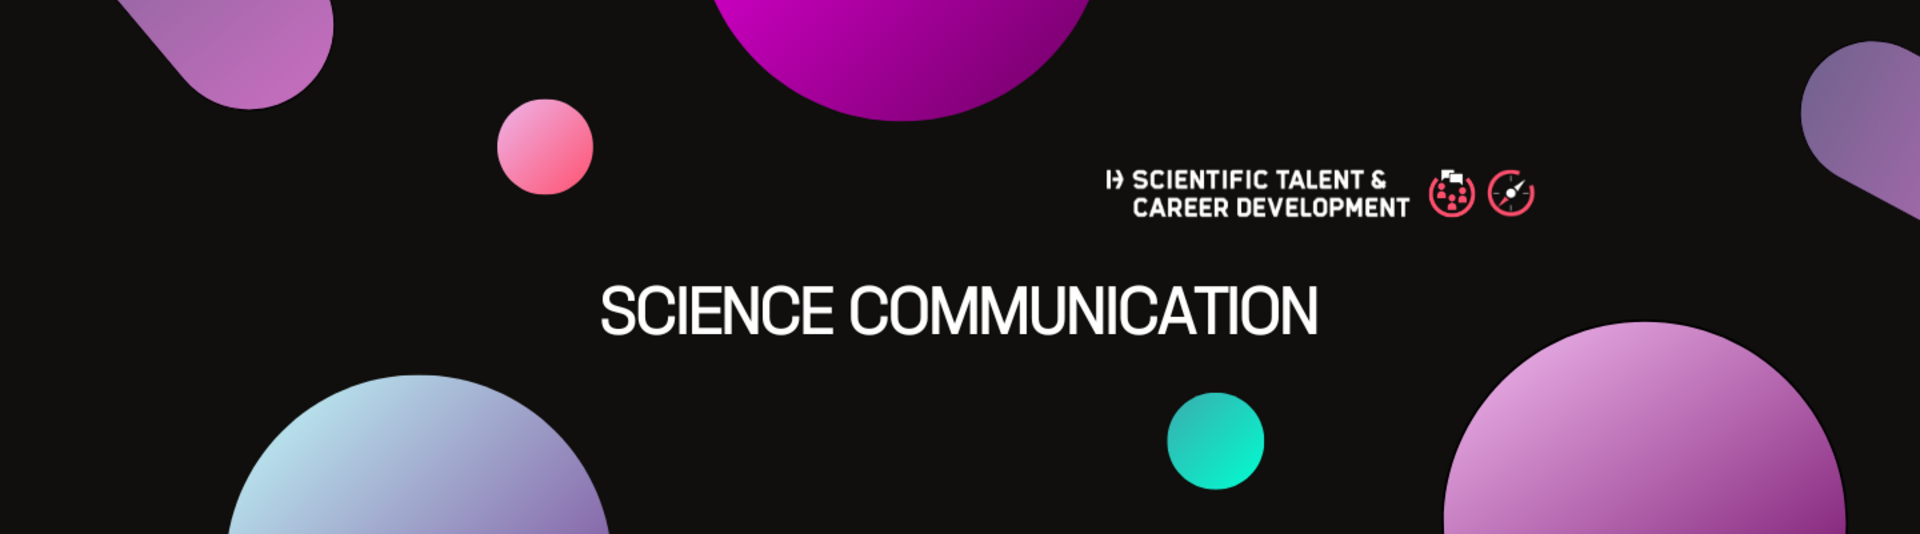 Titel Science Communication by Scientific Talent and Career Development